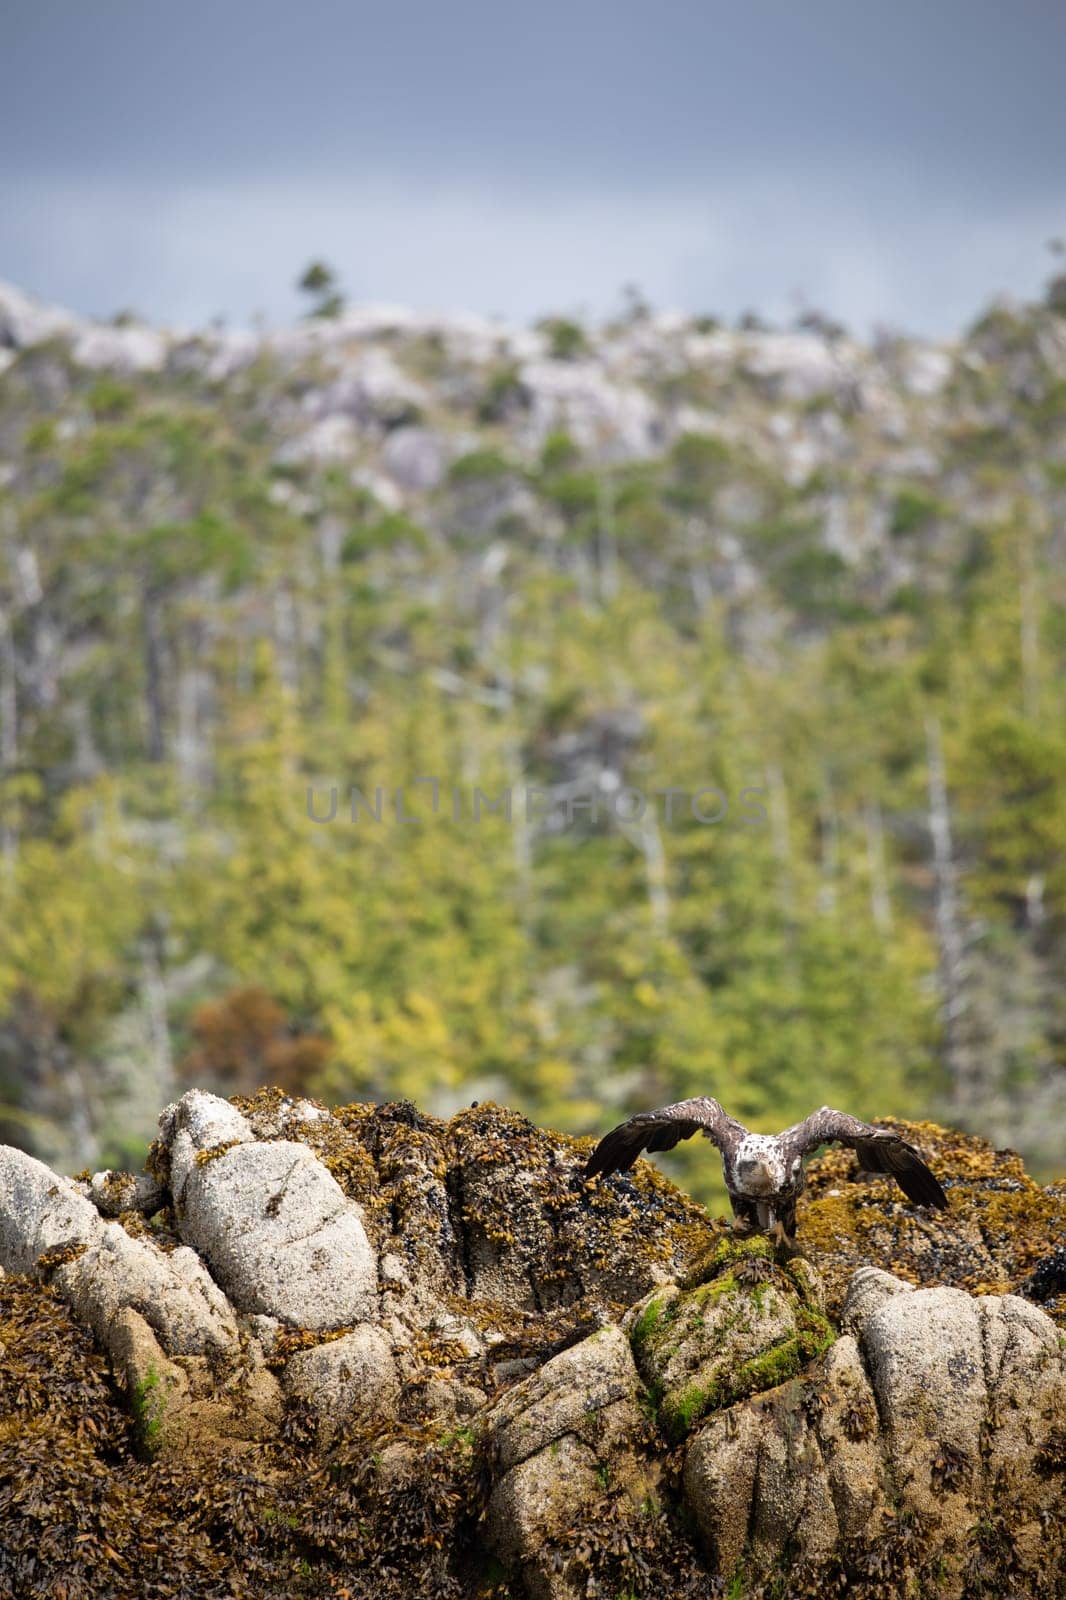 Immature or sub-adult bald eagle getting ready to take off from a rock covered in seaweed with trees in the background by Granchinho